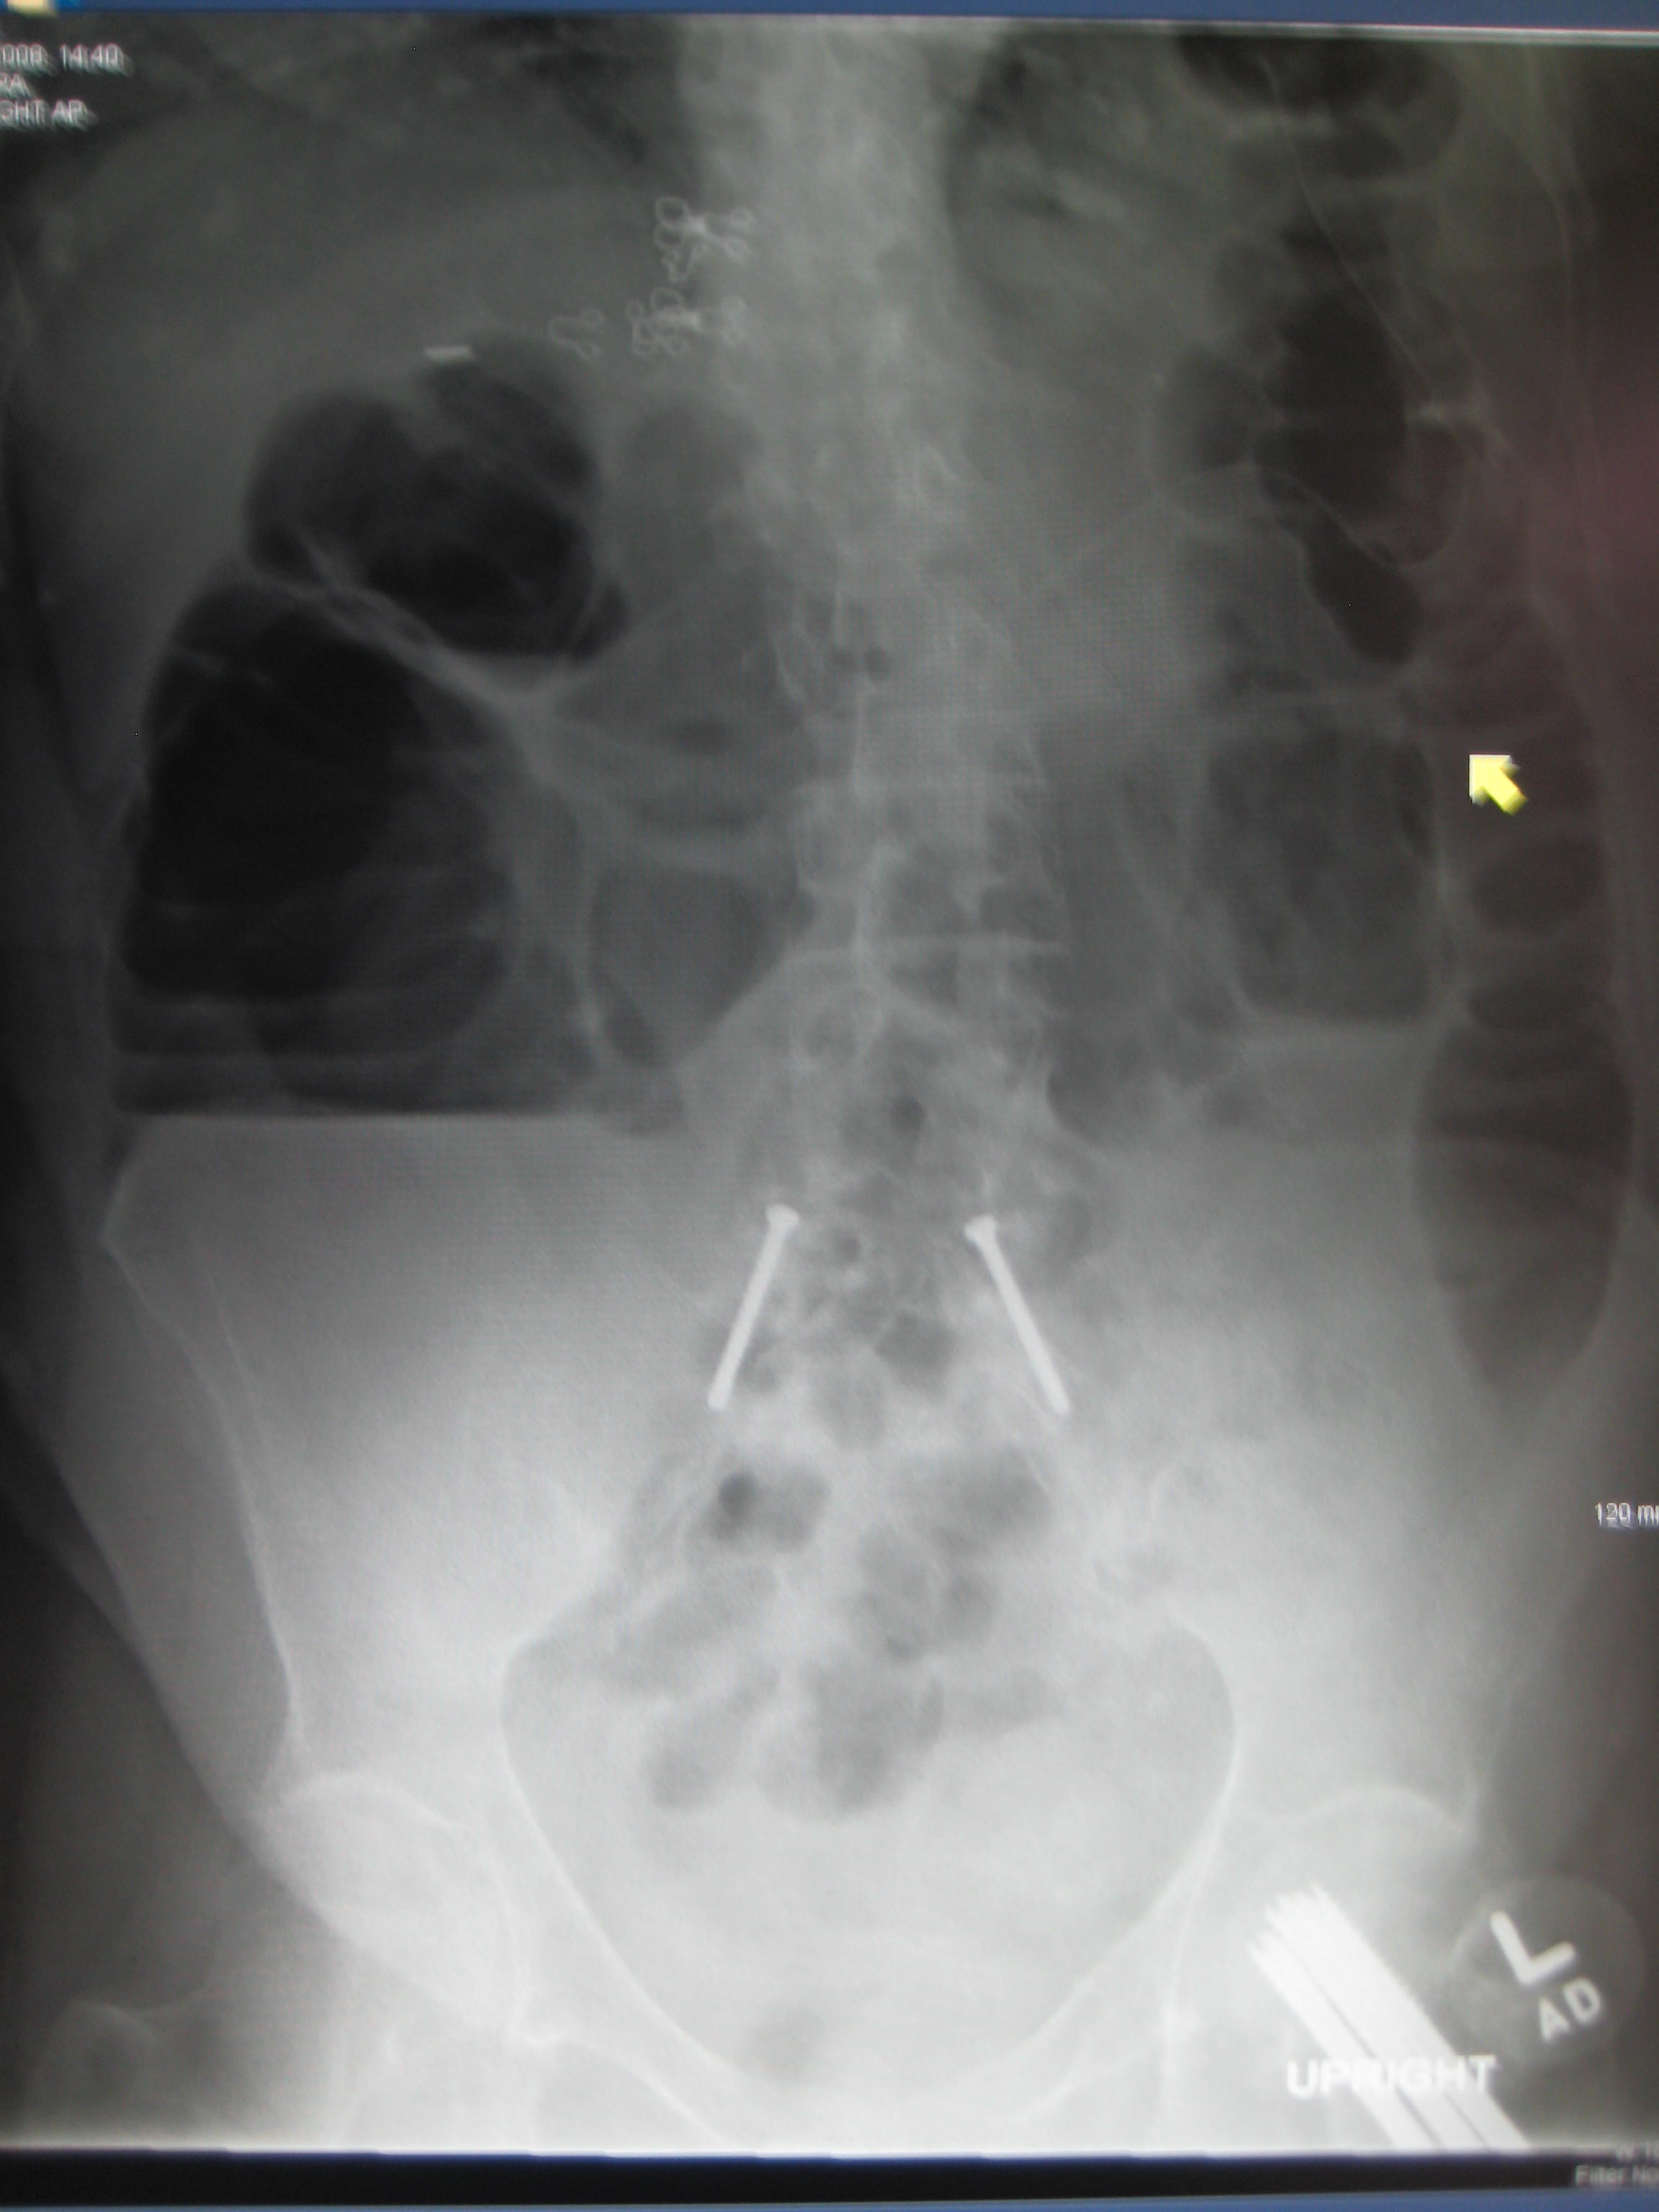 Upright abdominal X-ray of a patient with a large bowel obstruction showing multiple air fluid levels and dilated loops of bowel.